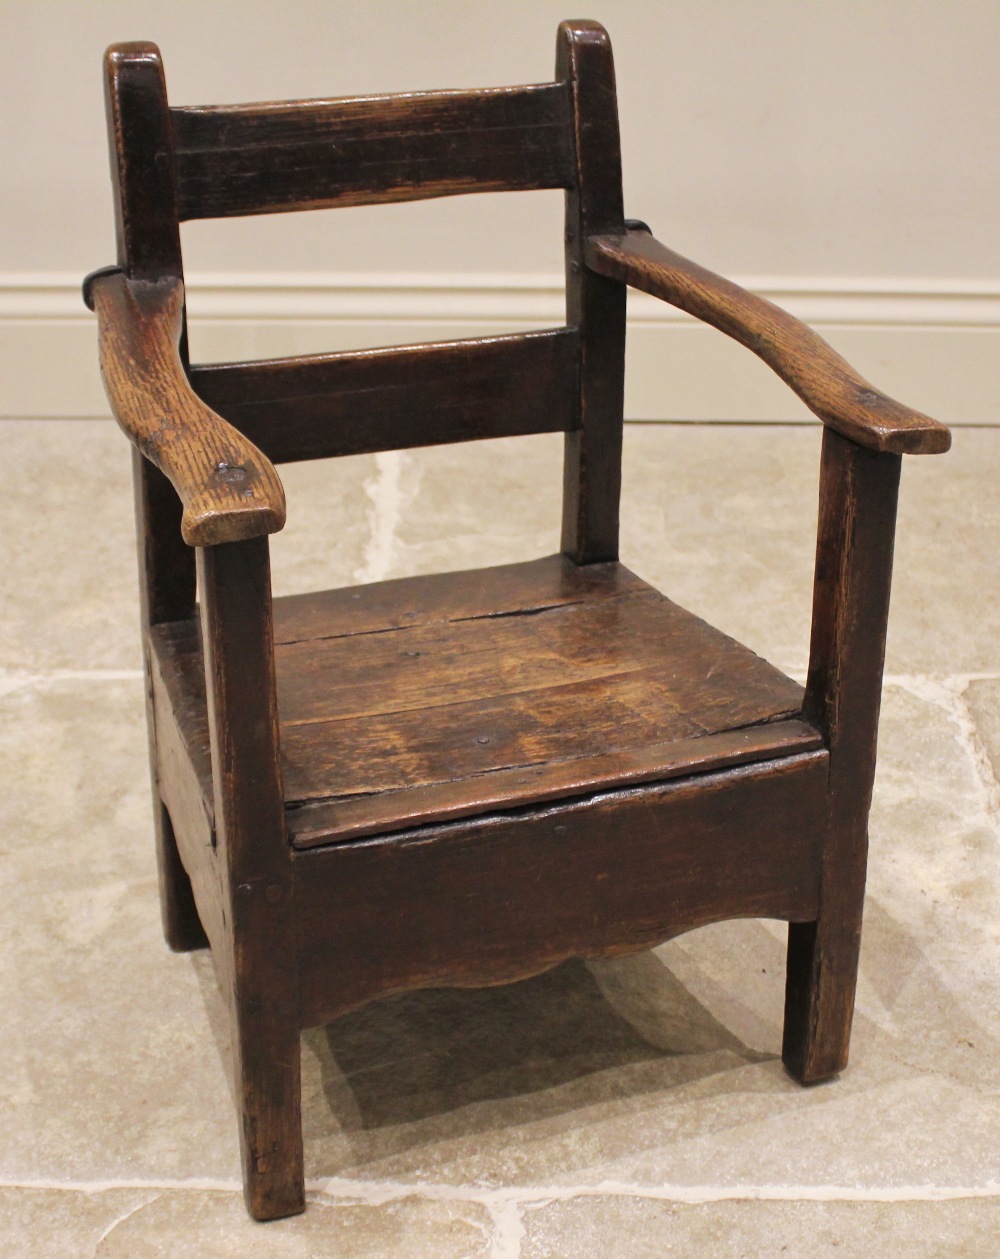 A Welsh oak child's primitive chair, late 18th/early 19th century, the rail back above open arms and